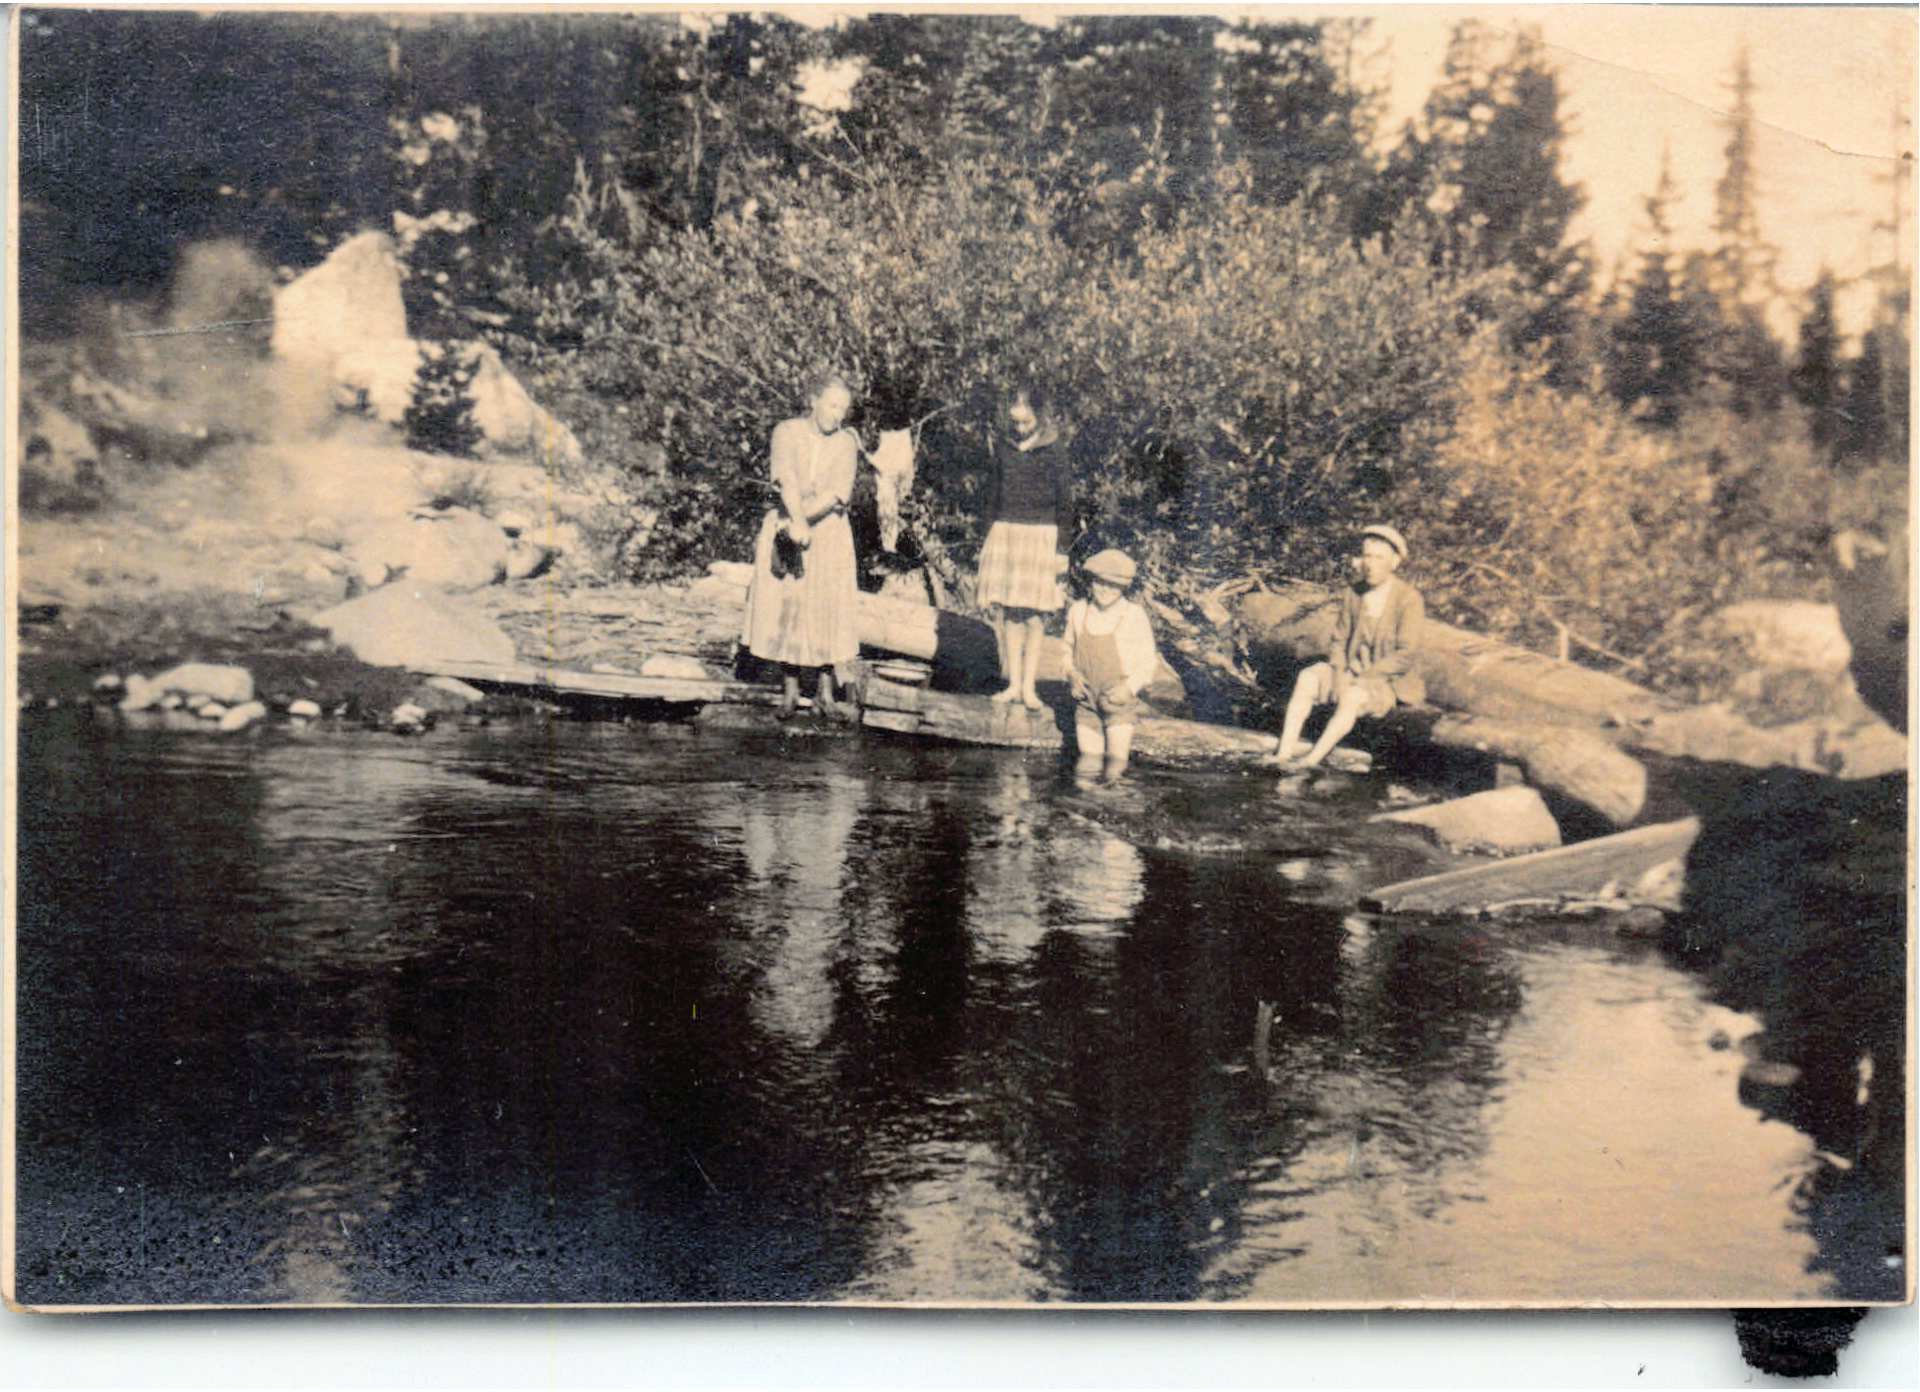 Family wading by a river